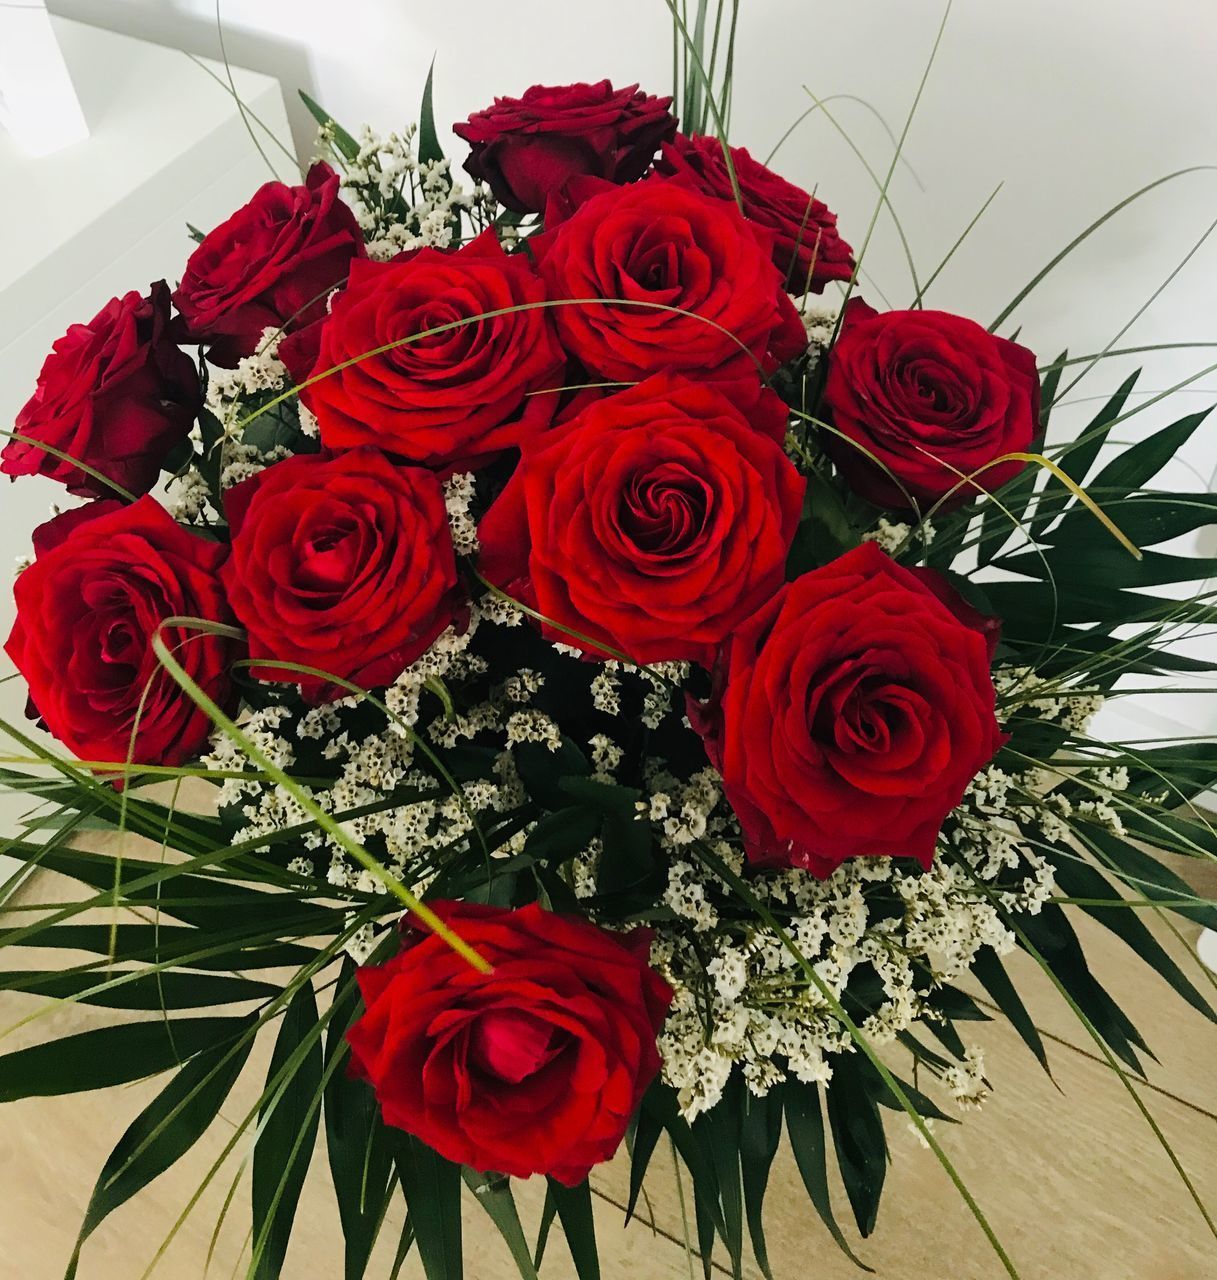 RED ROSE BOUQUET